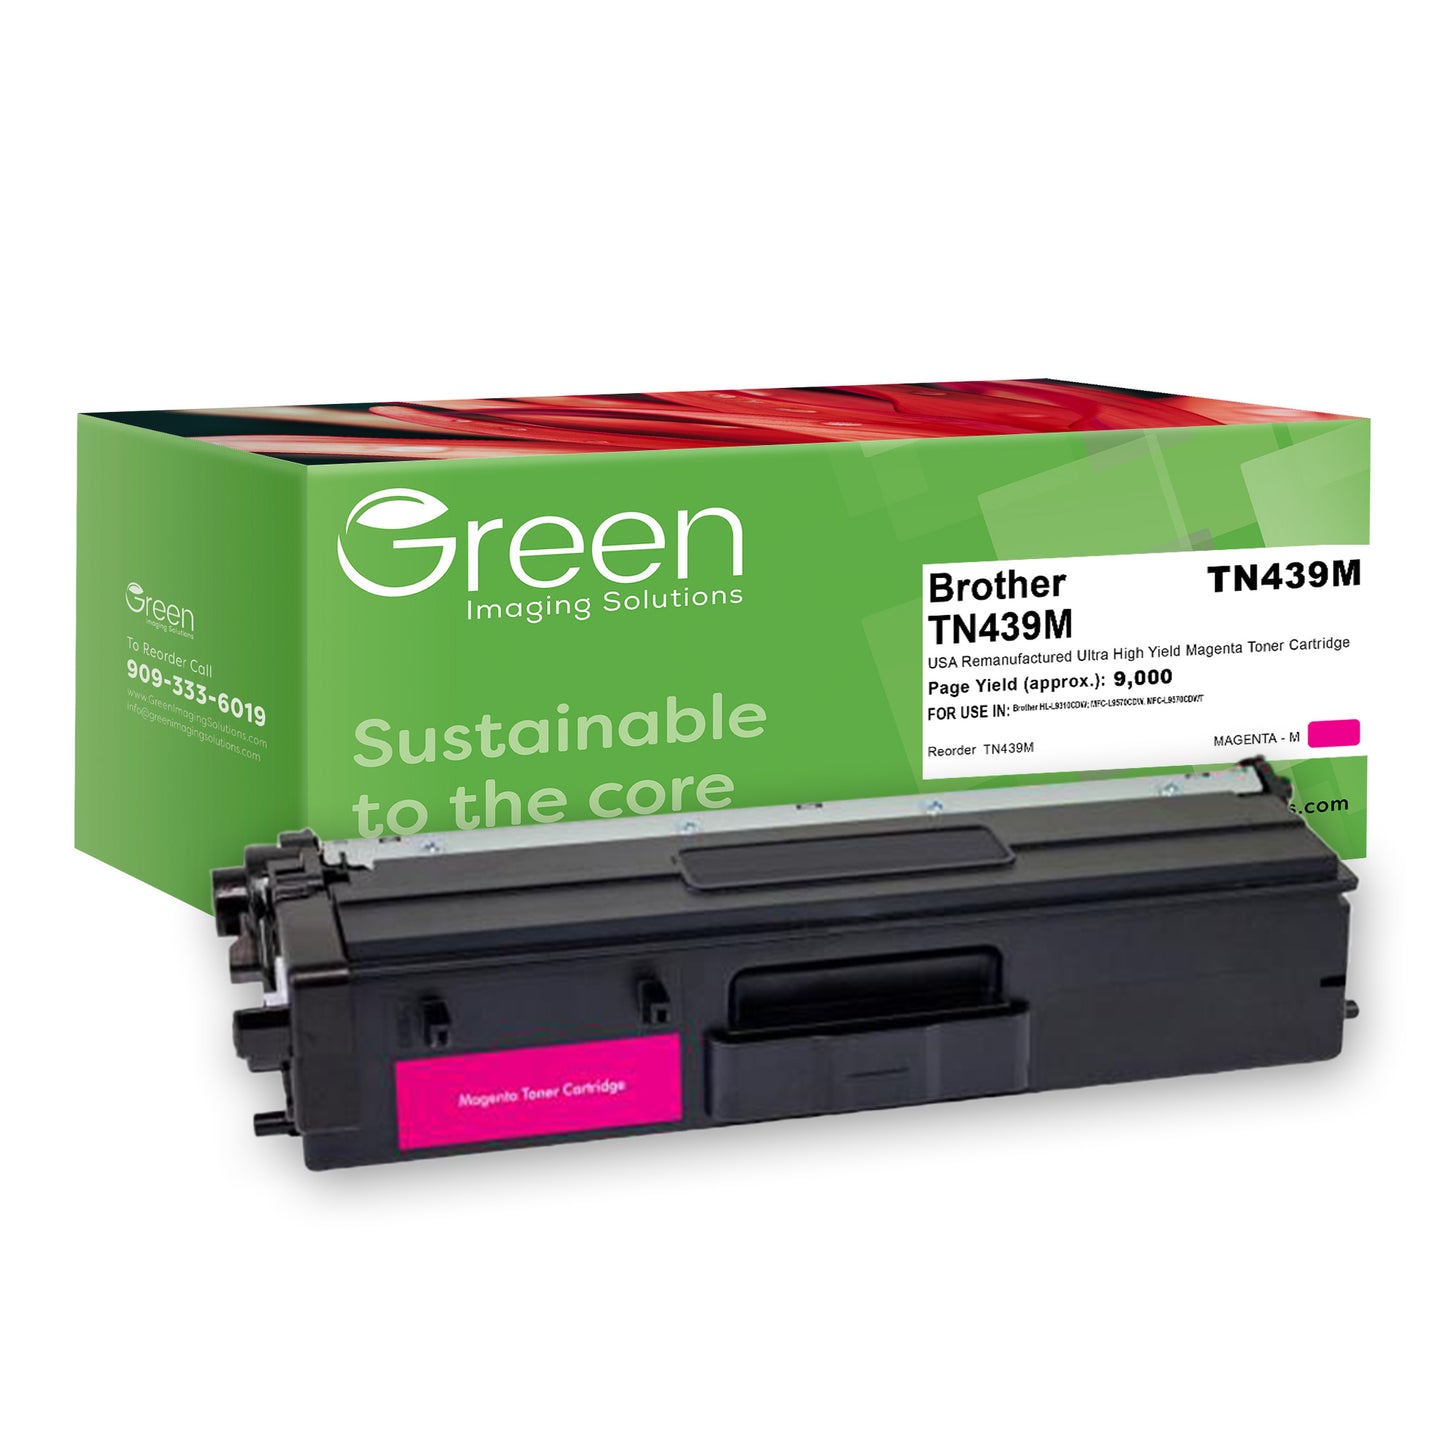 Green Imaging Solutions USA Remanufactured Ultra High Yield Magenta Toner Cartridge for Brother TN439M